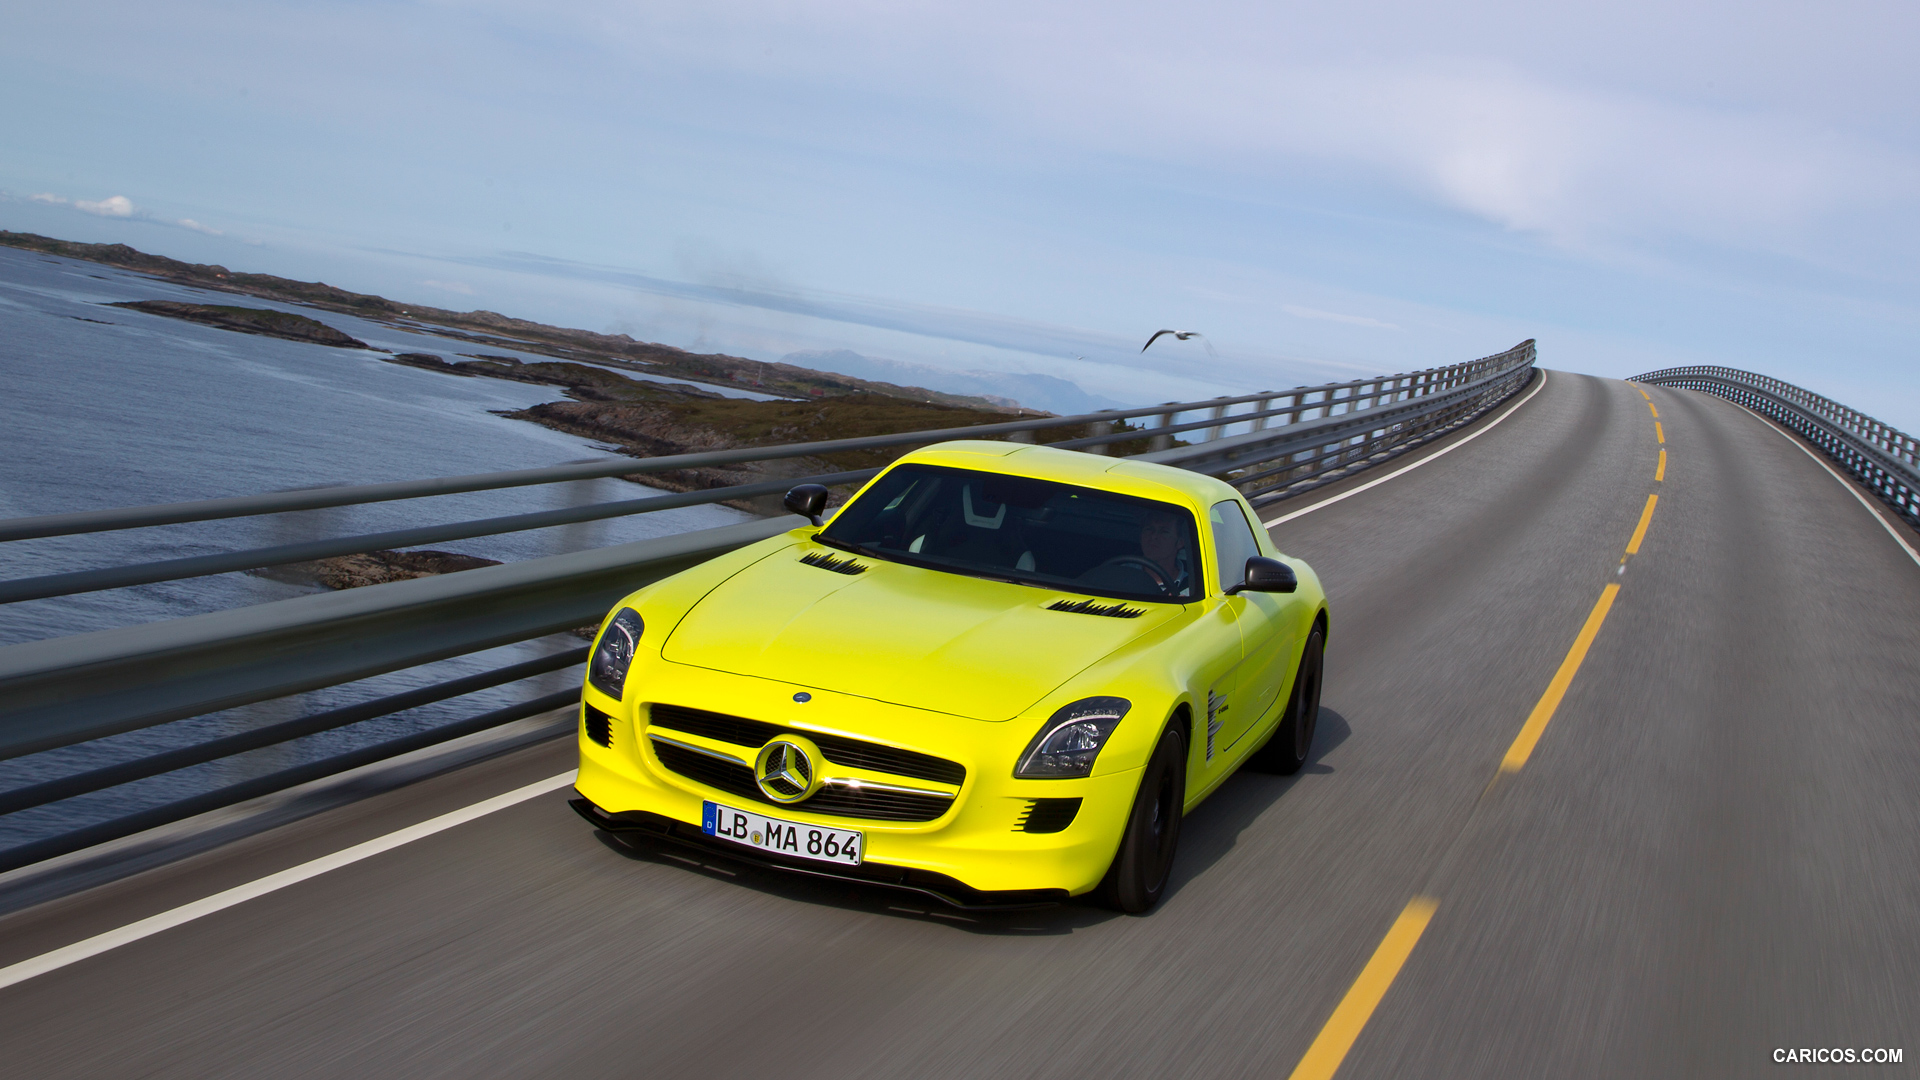 Mercedes-Benz SLS AMG E-CELL Concept  - Front, #33 of 60